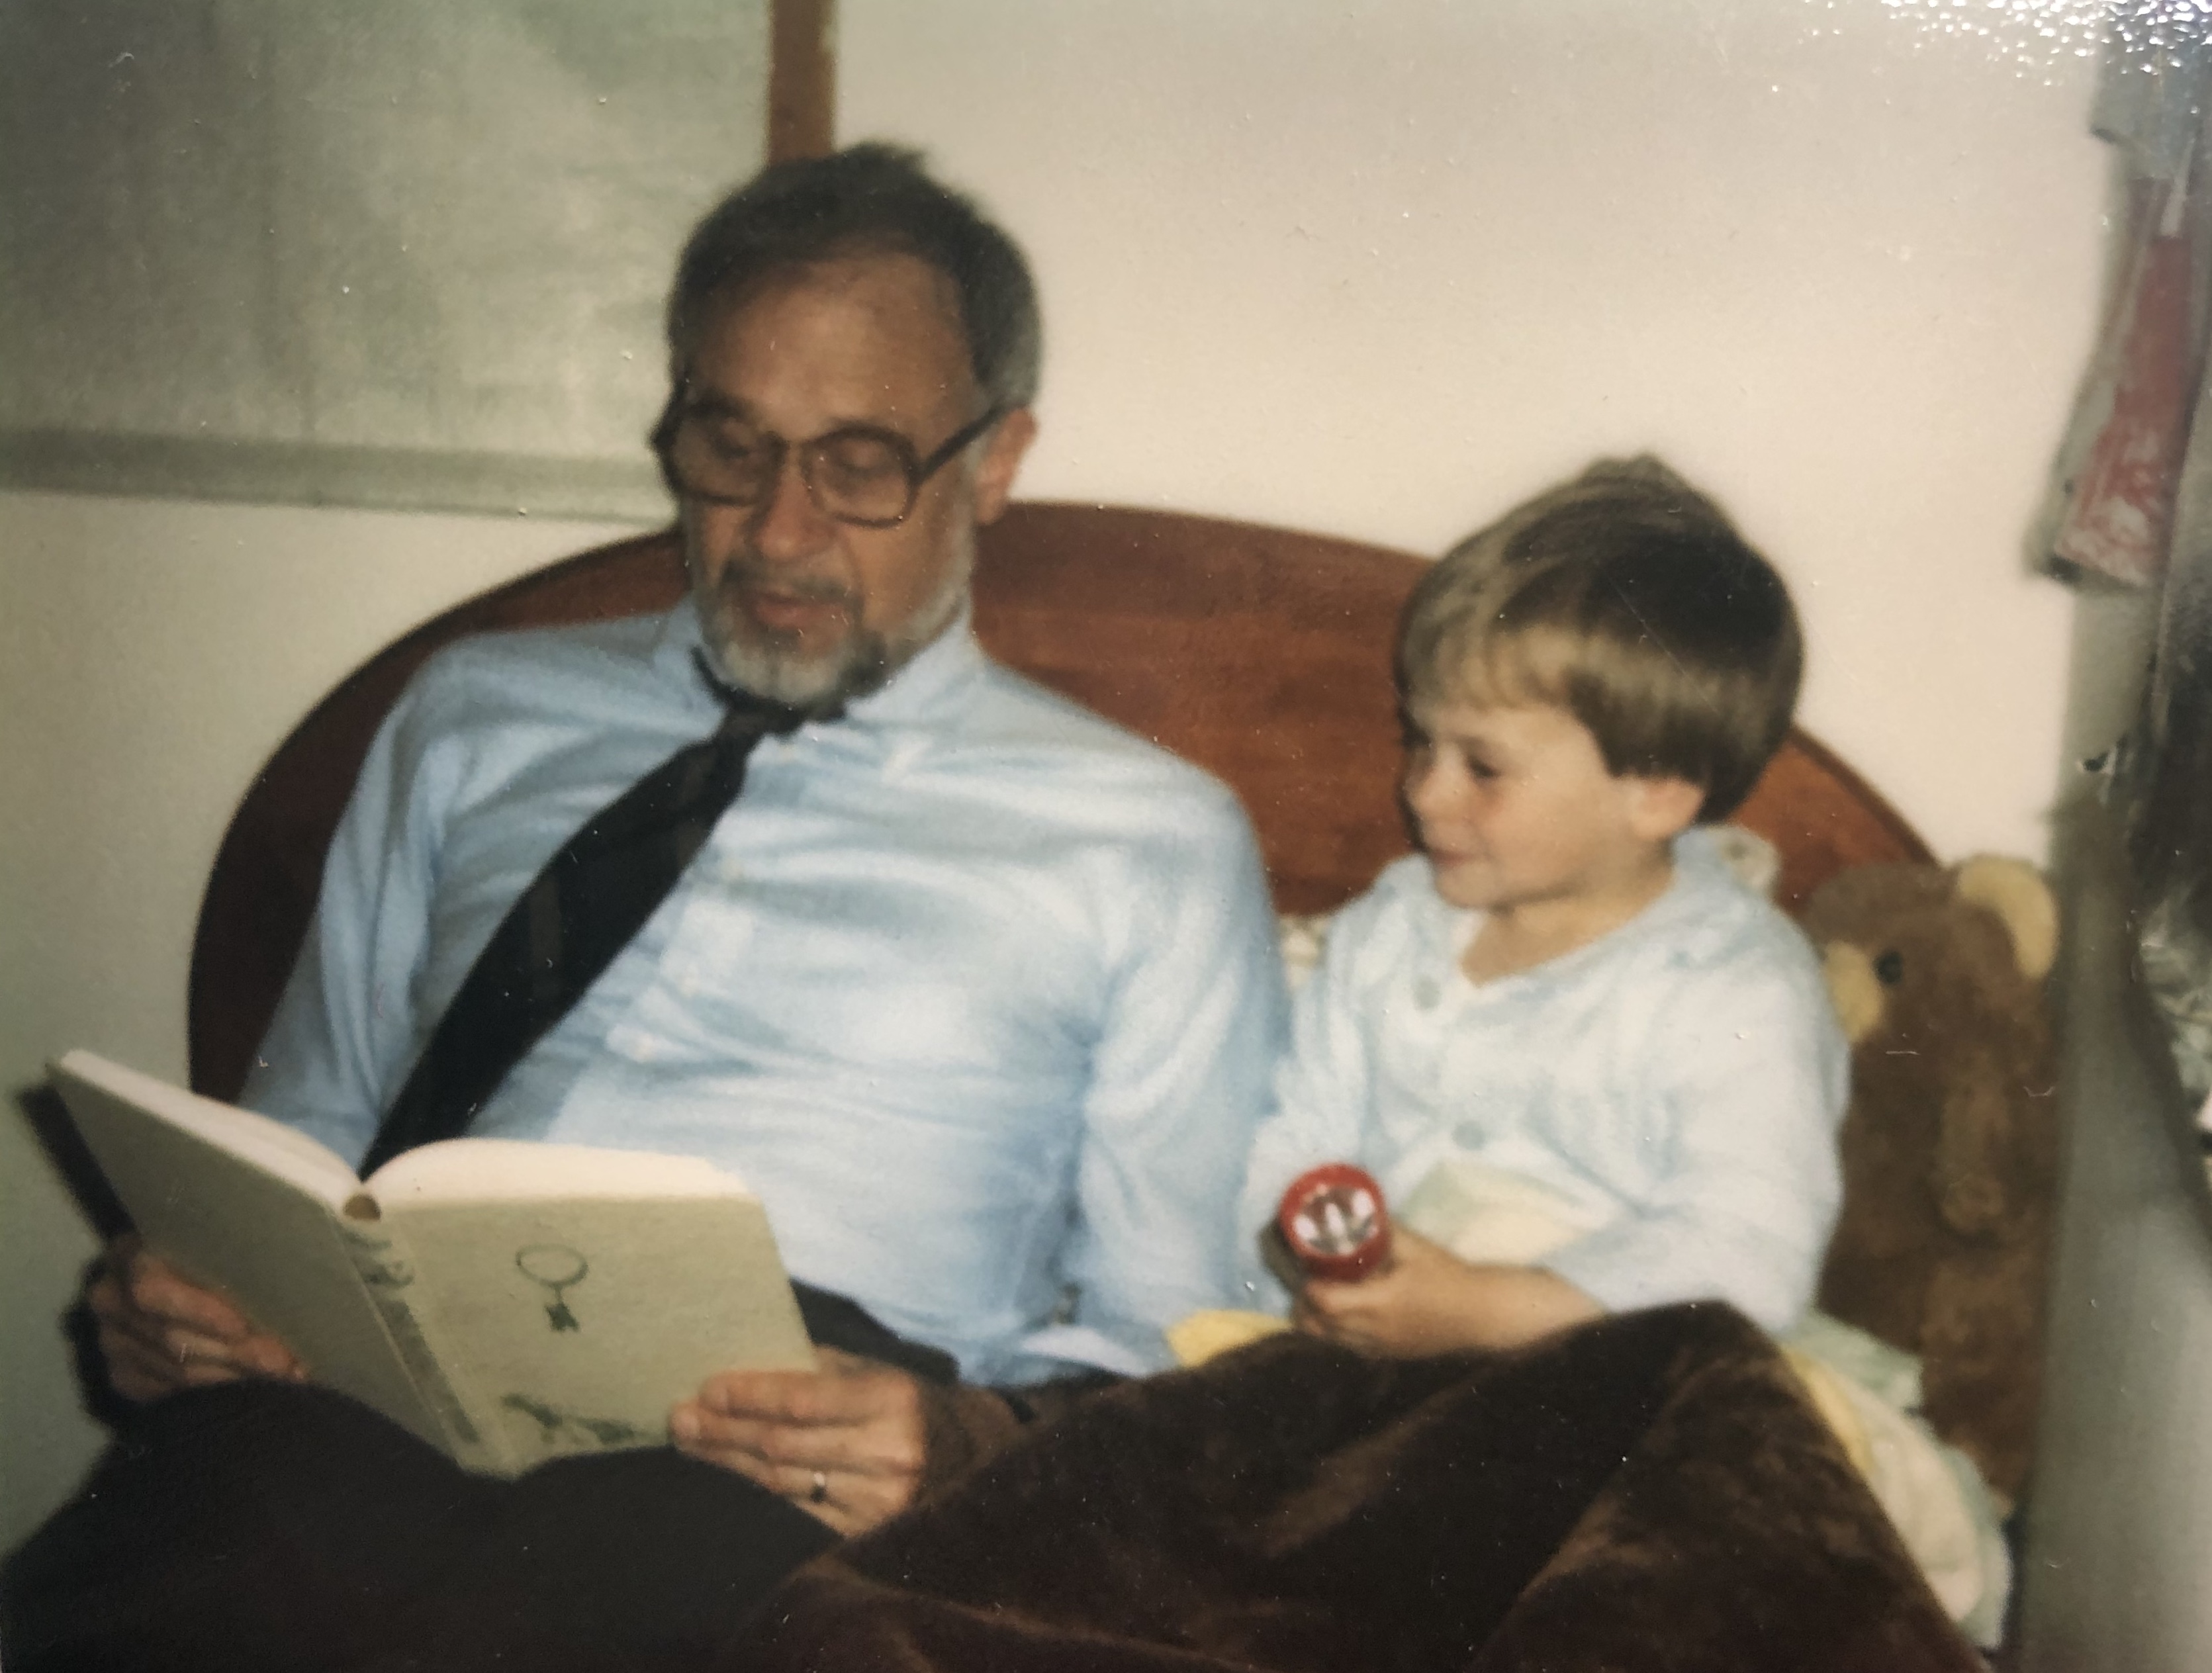 My grandfather, Keith Seegmiller, reading to me when I was small